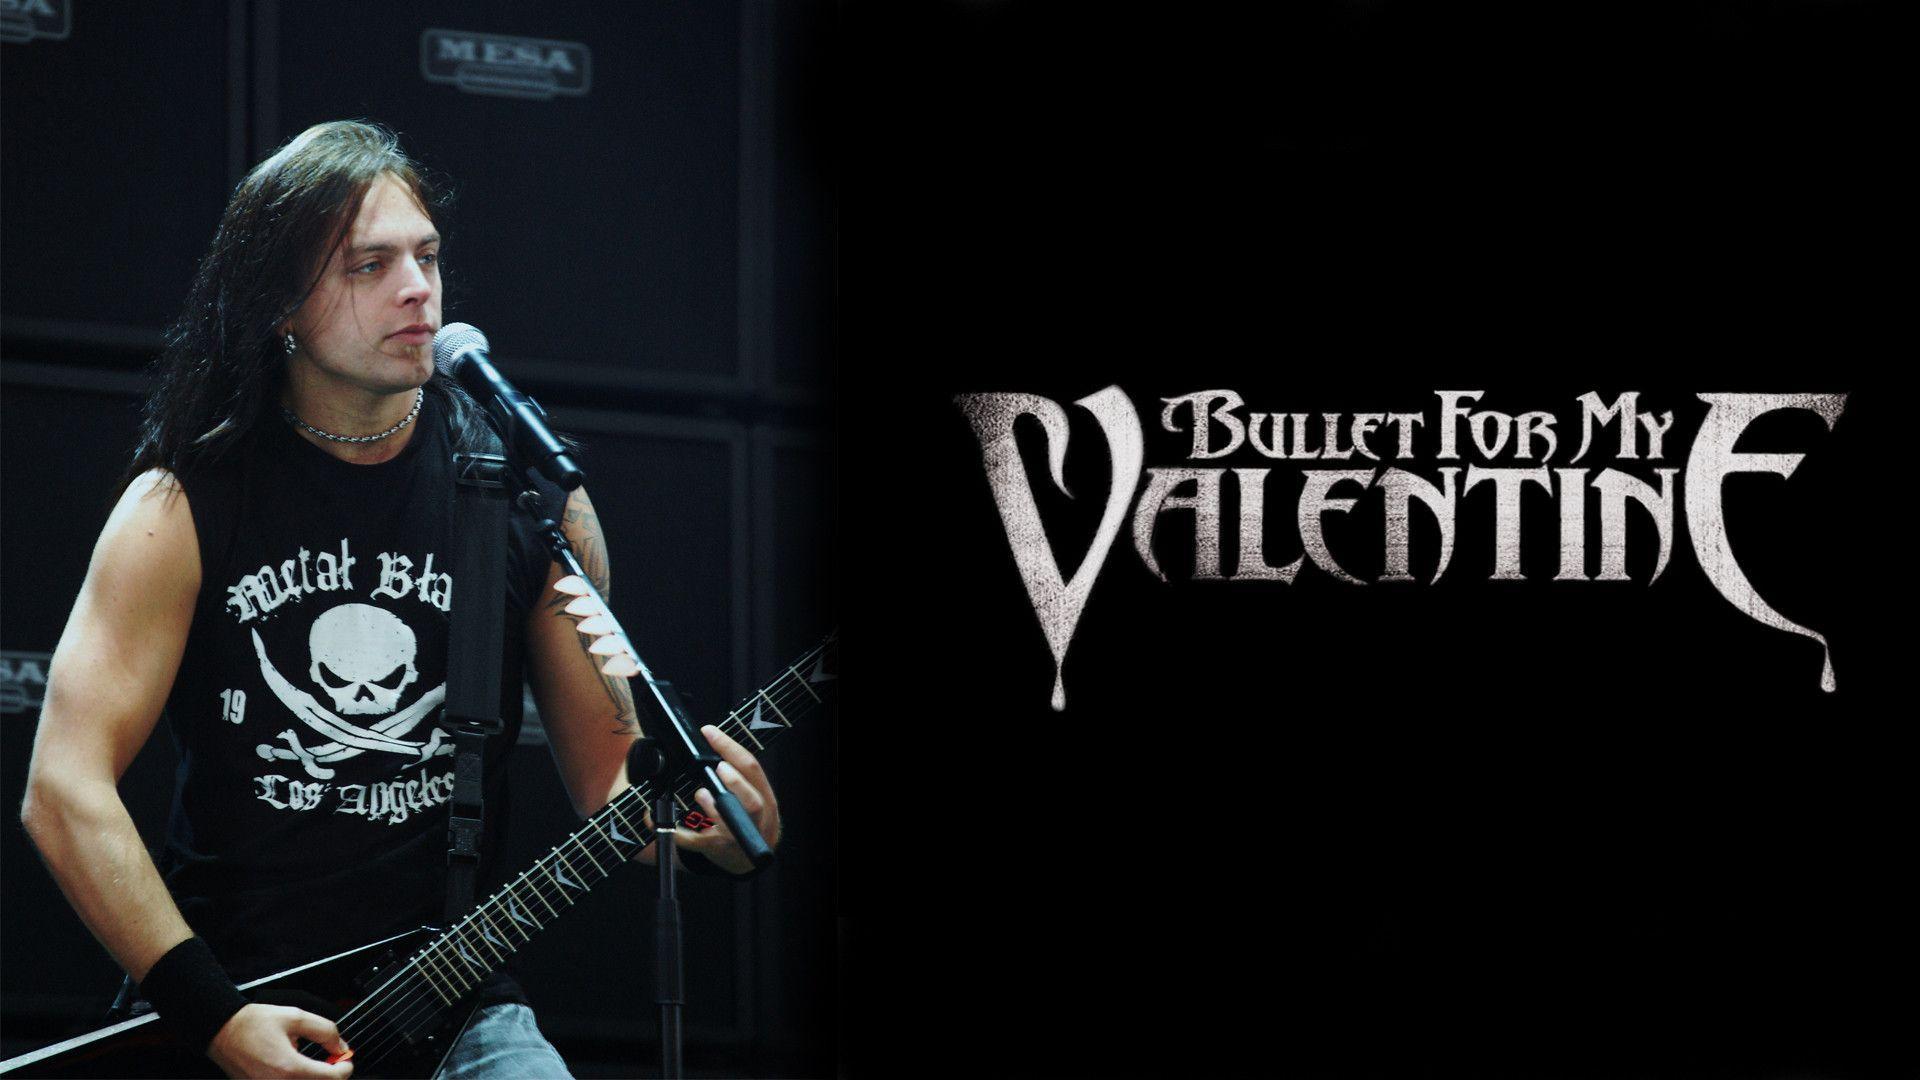 Music Bullet For My Valentine Wallpaper 1920x1080 px Free Download